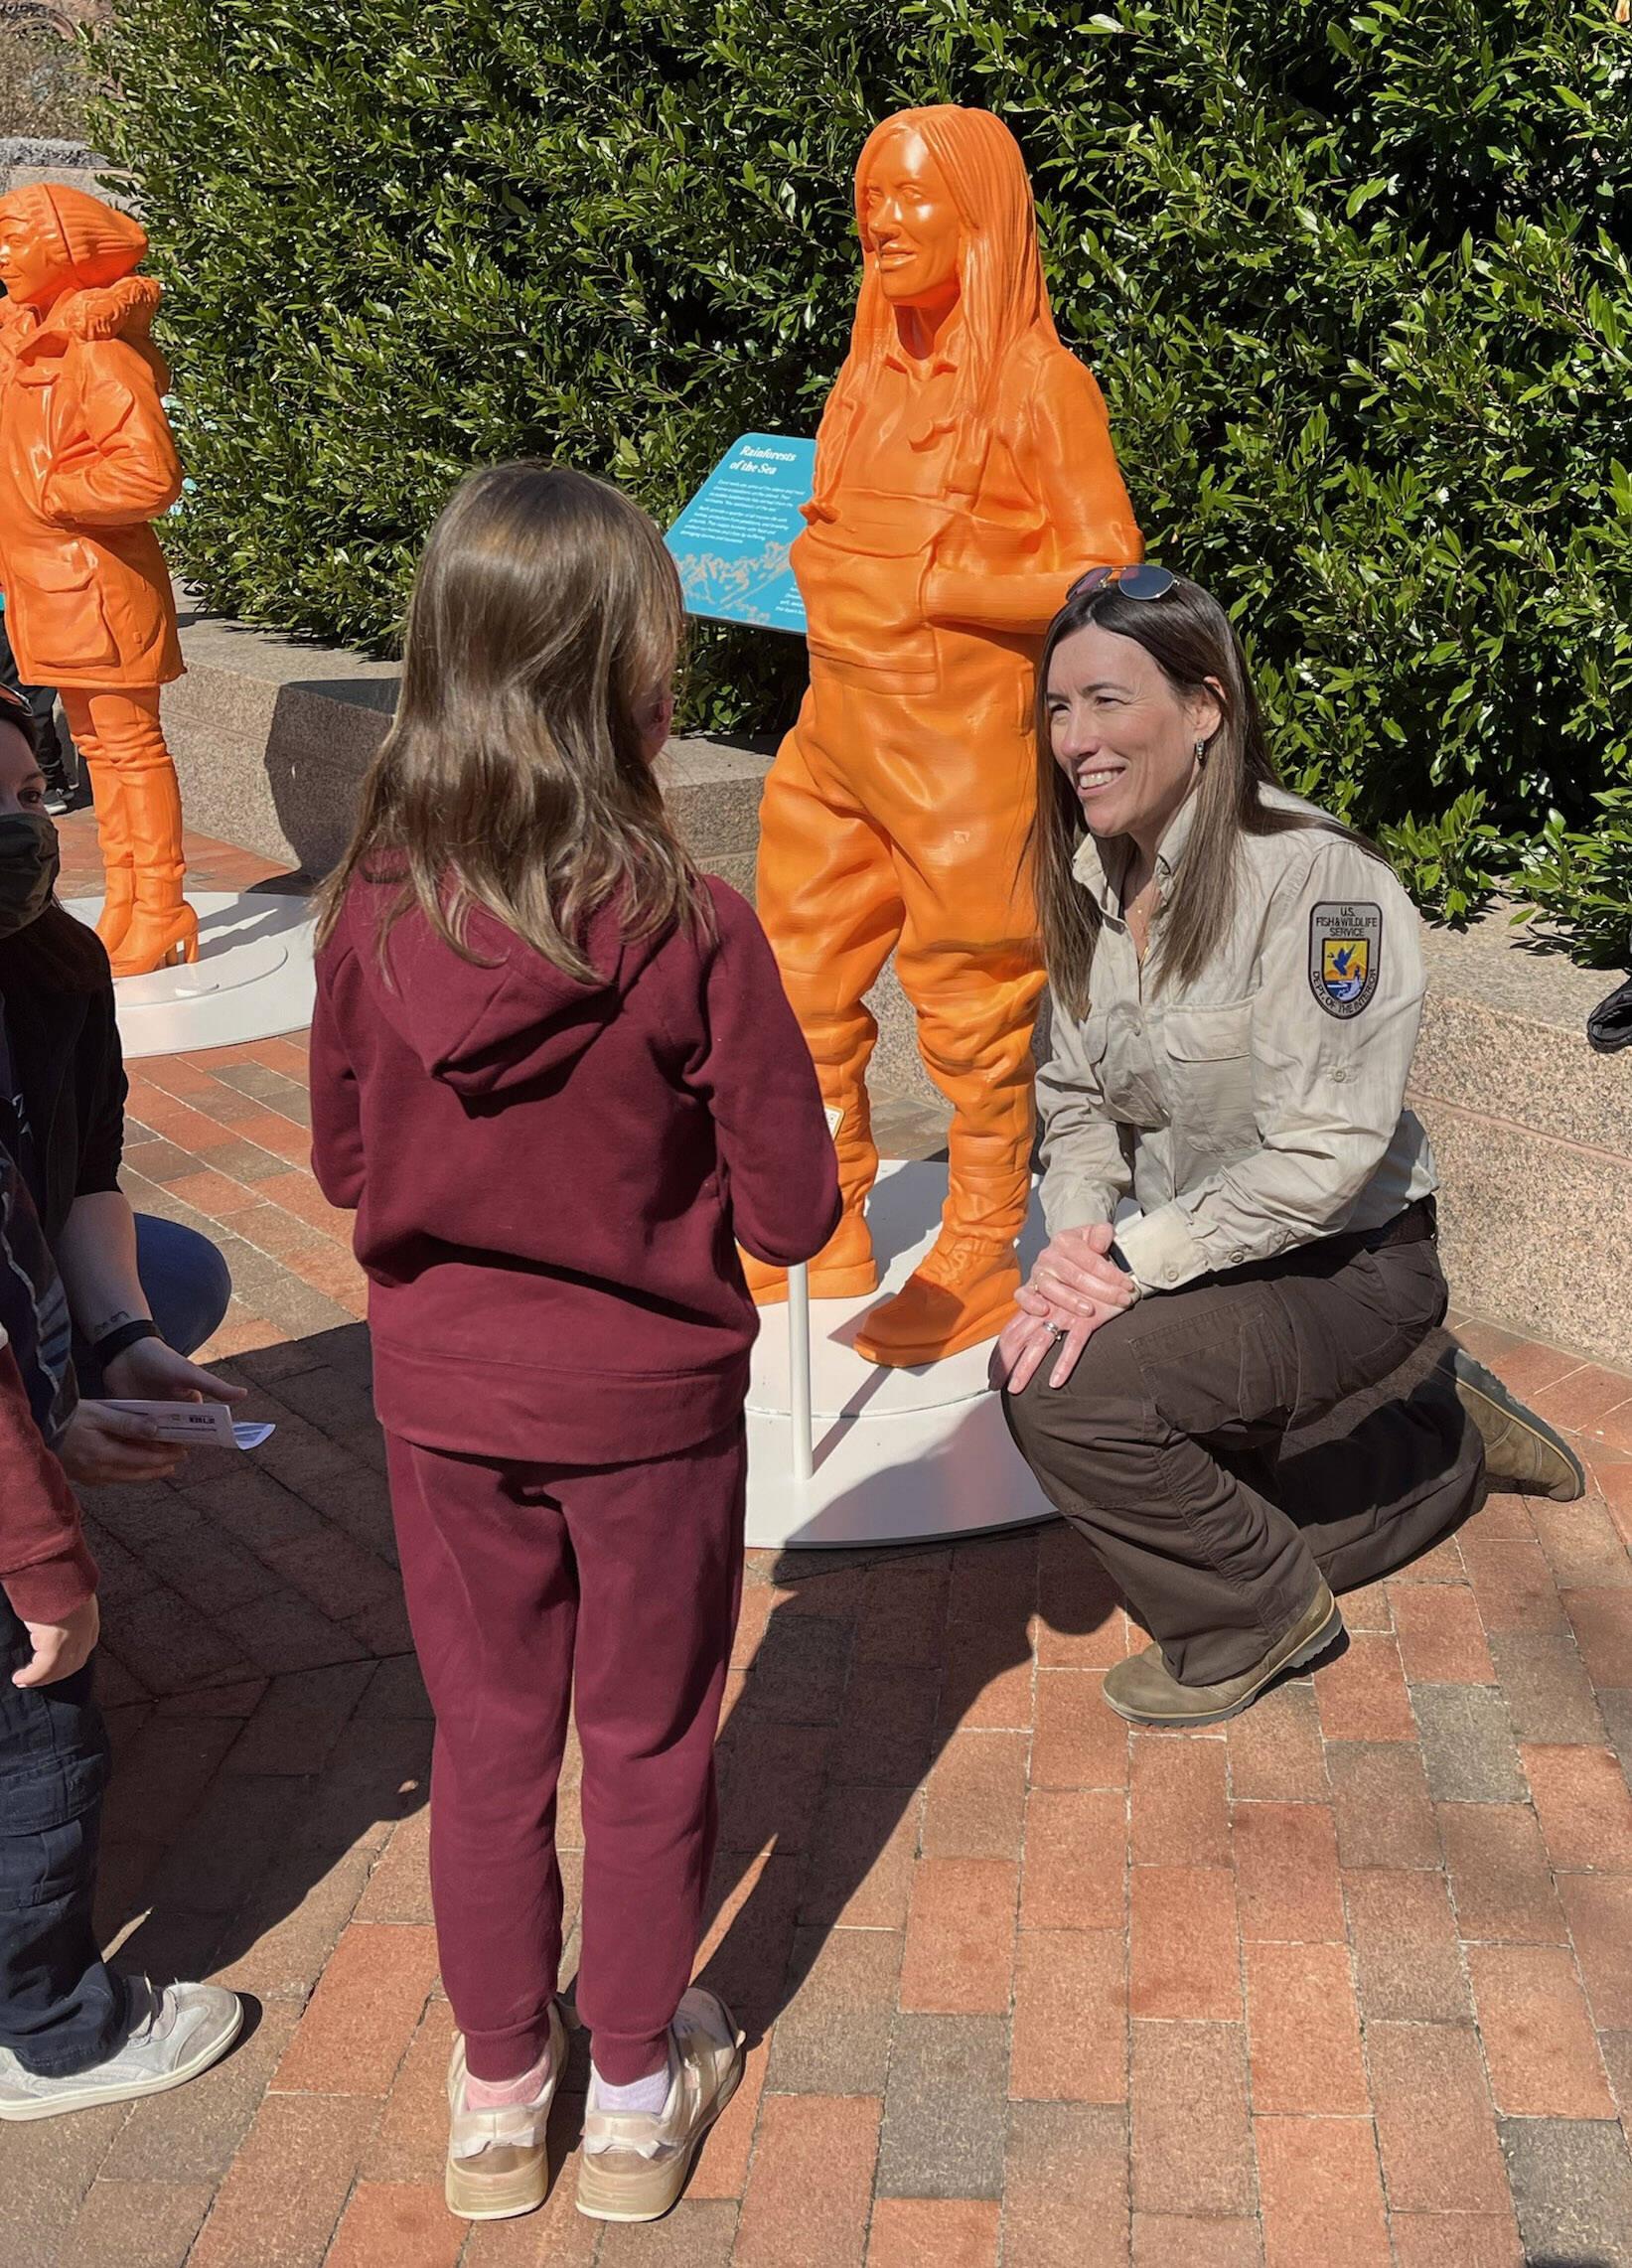 Kris Inman speaks to a young girl, age 7, who hopes to be a veterinarian at the #IfThenSheCan-The Exhibit showcasing the Smithsonian Institute Womenճ Future Month. (Photo by Kim Spectre)